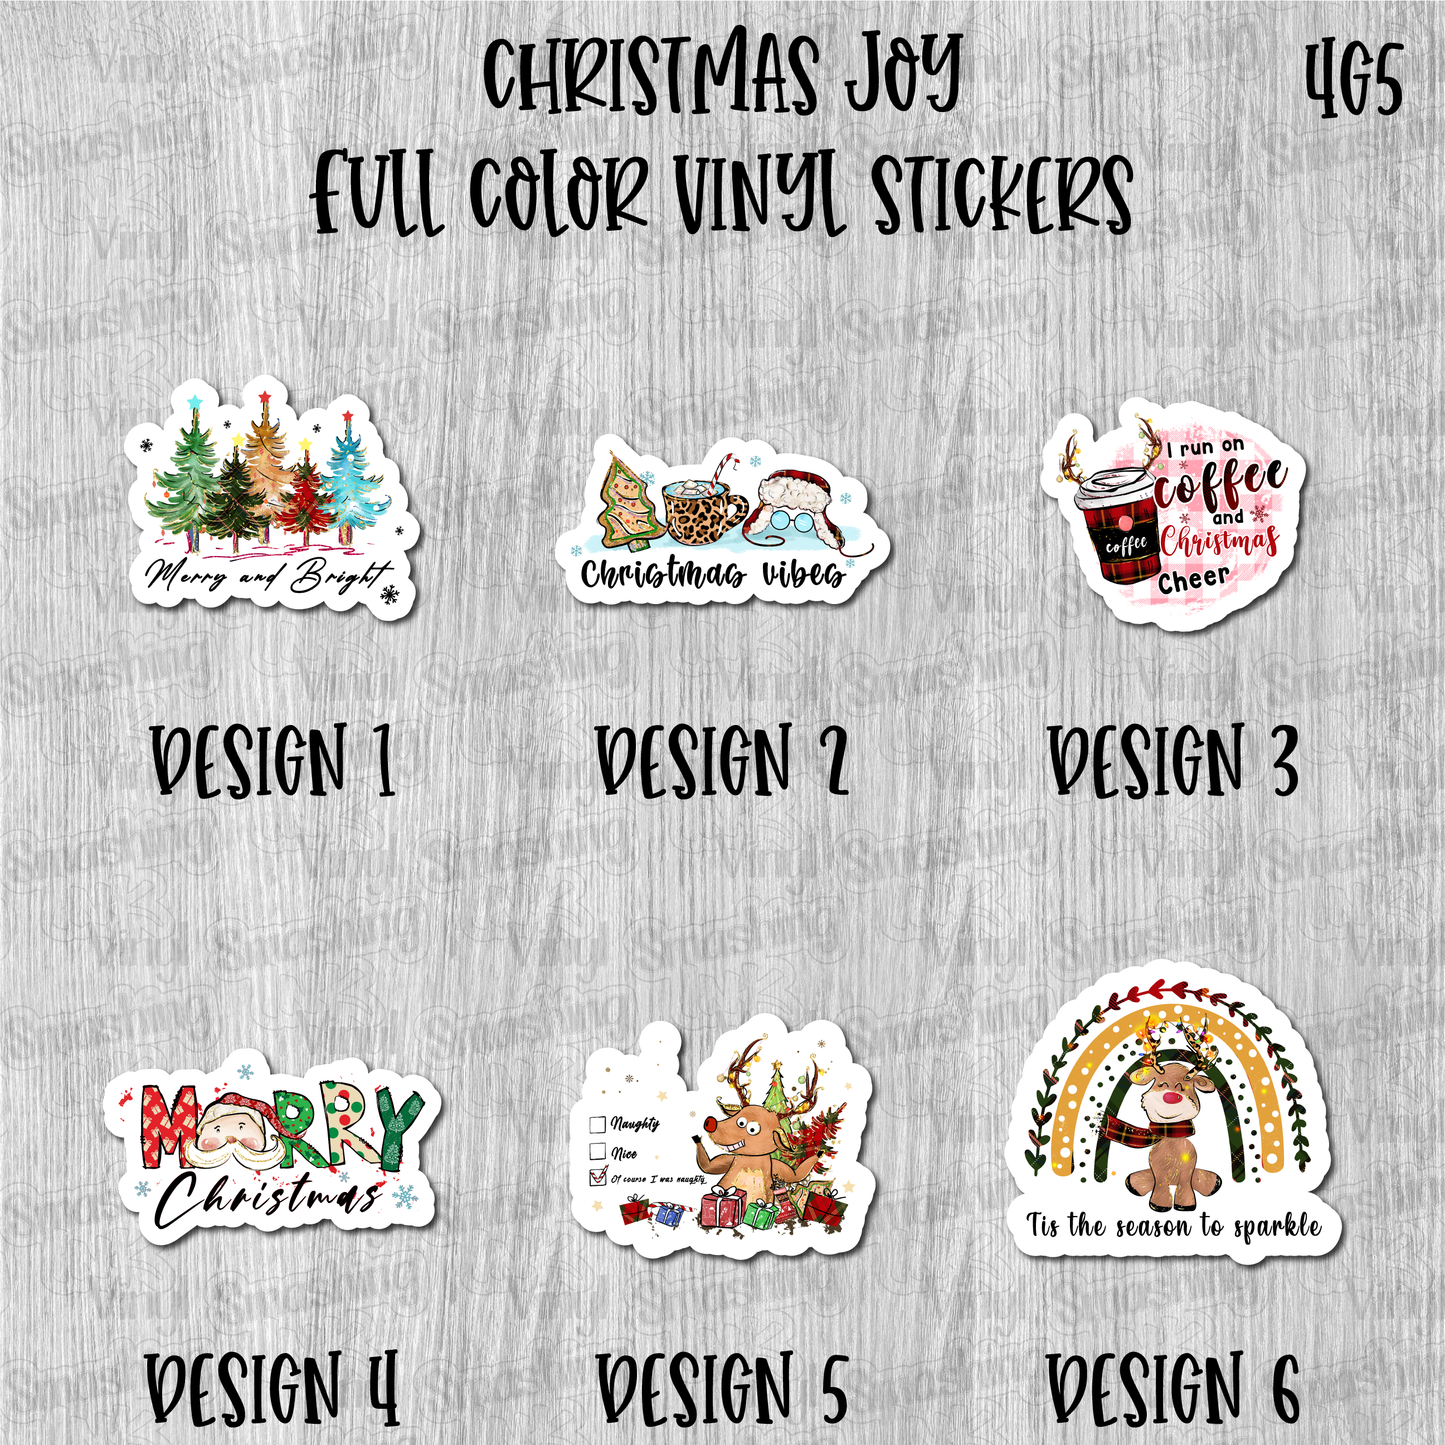 Christmas Joy - Full Color Vinyl Stickers (SHIPS IN 3-7 BUS DAYS)